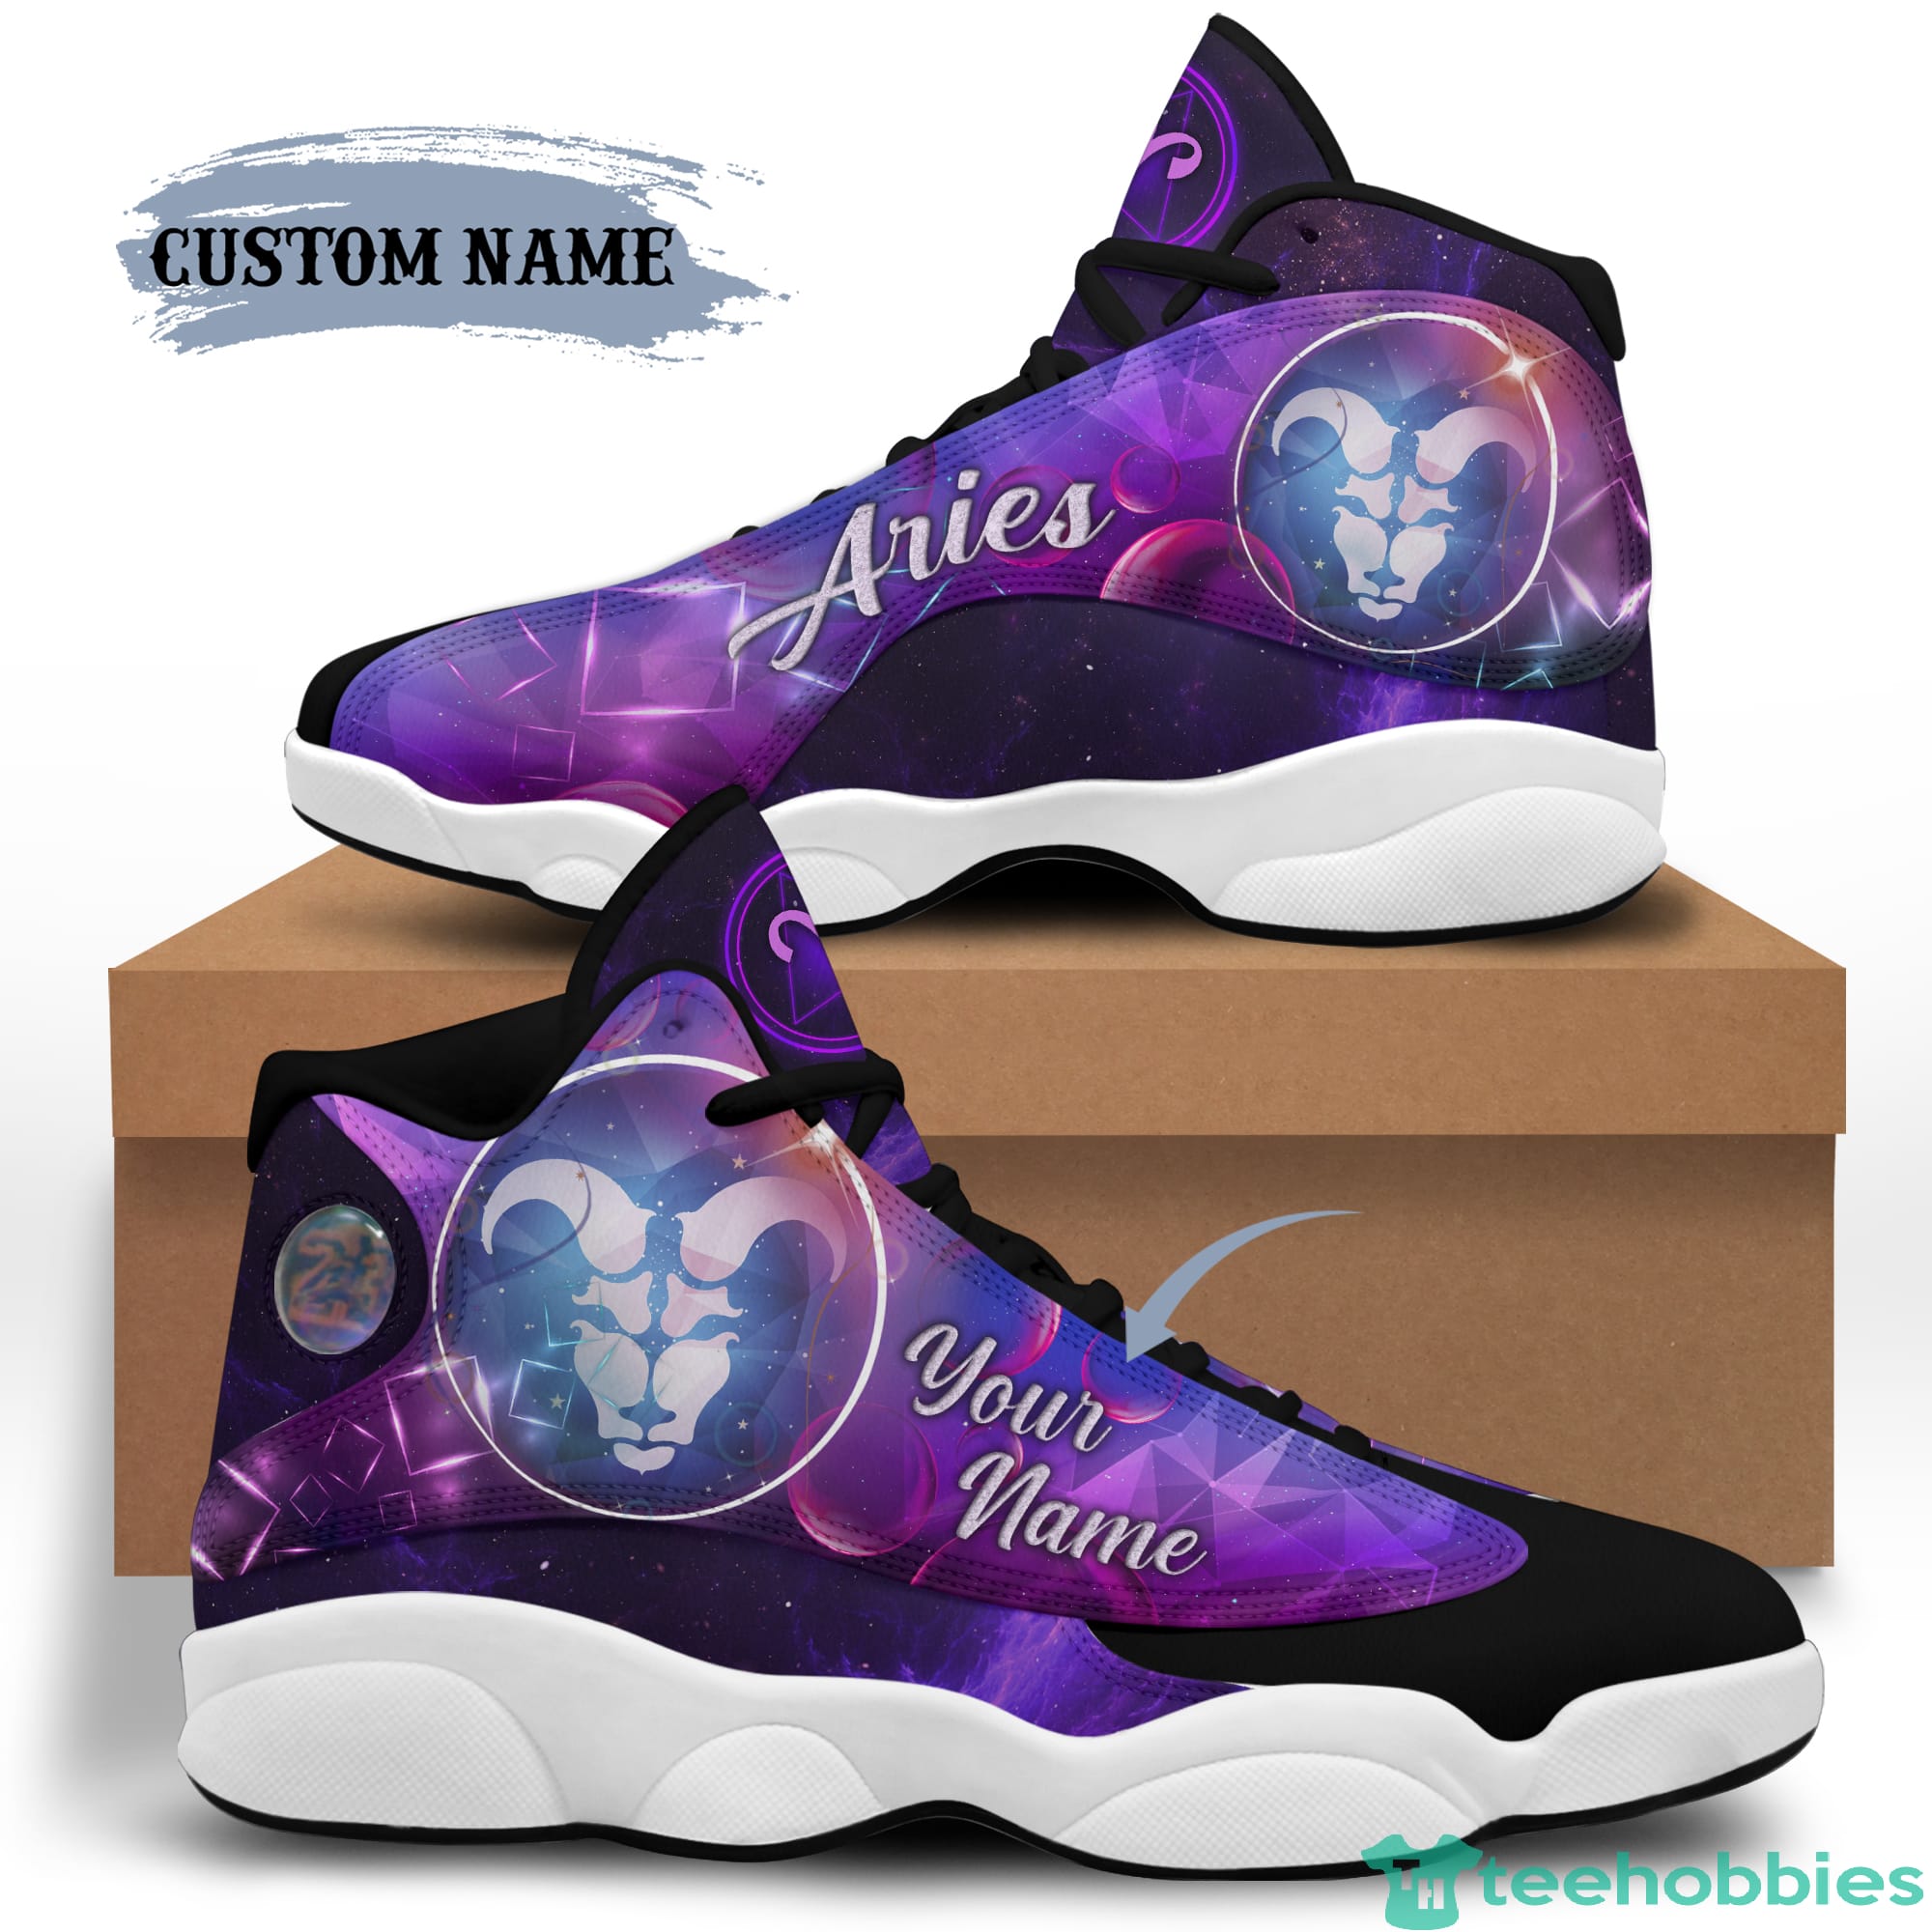 Aries Birthday Gift Personalized Name Personalized Name Air Jordan 13 Shoes SKU-297